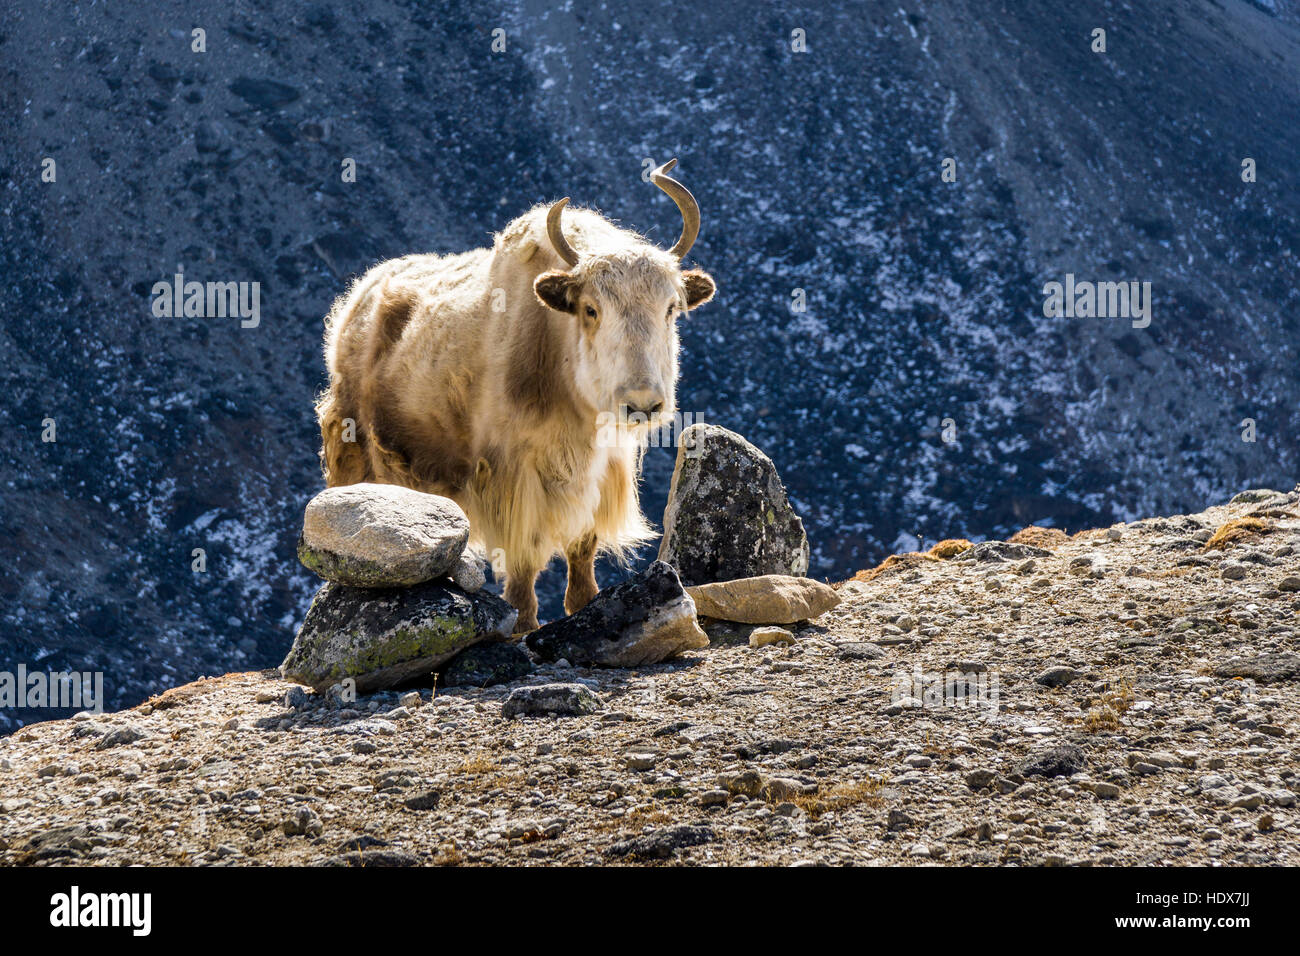 A white yak ist standing on a hill, mountain slopes in the distance Stock Photo